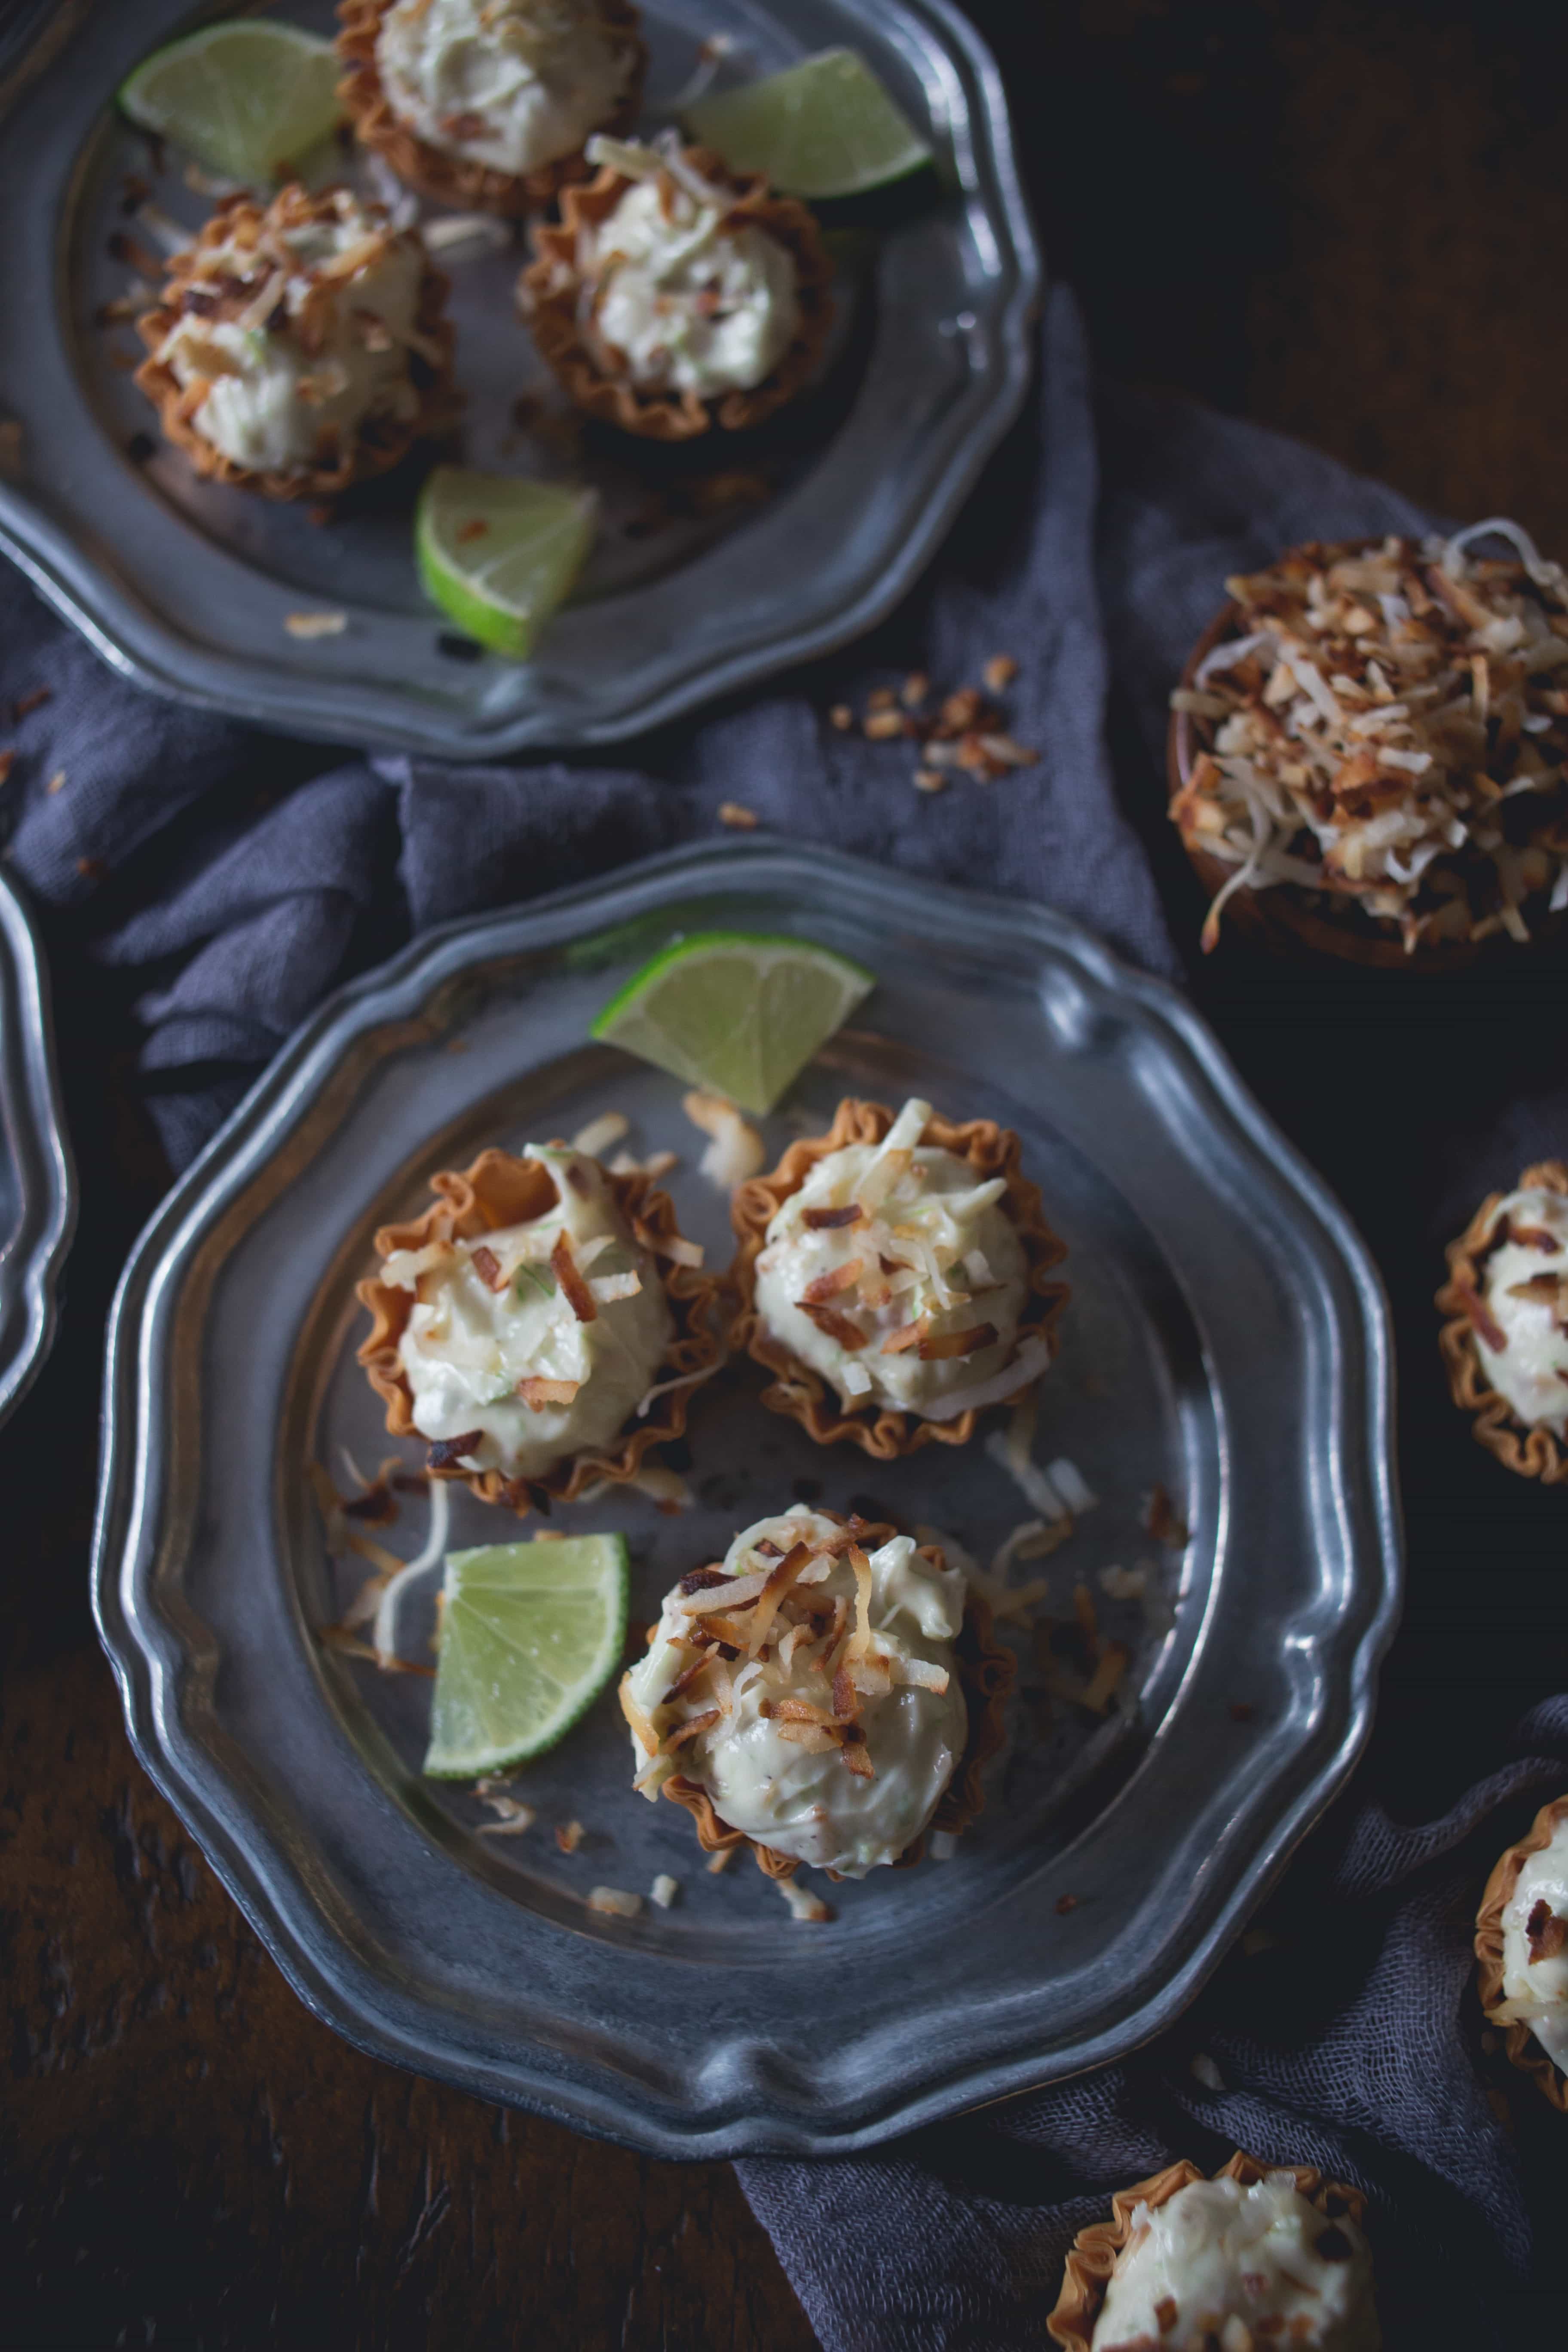 These no bake coconut lime cheesecake bites are the perfect party food. Super simple to make and ready in under 30 minutes. Say hello to dessert!